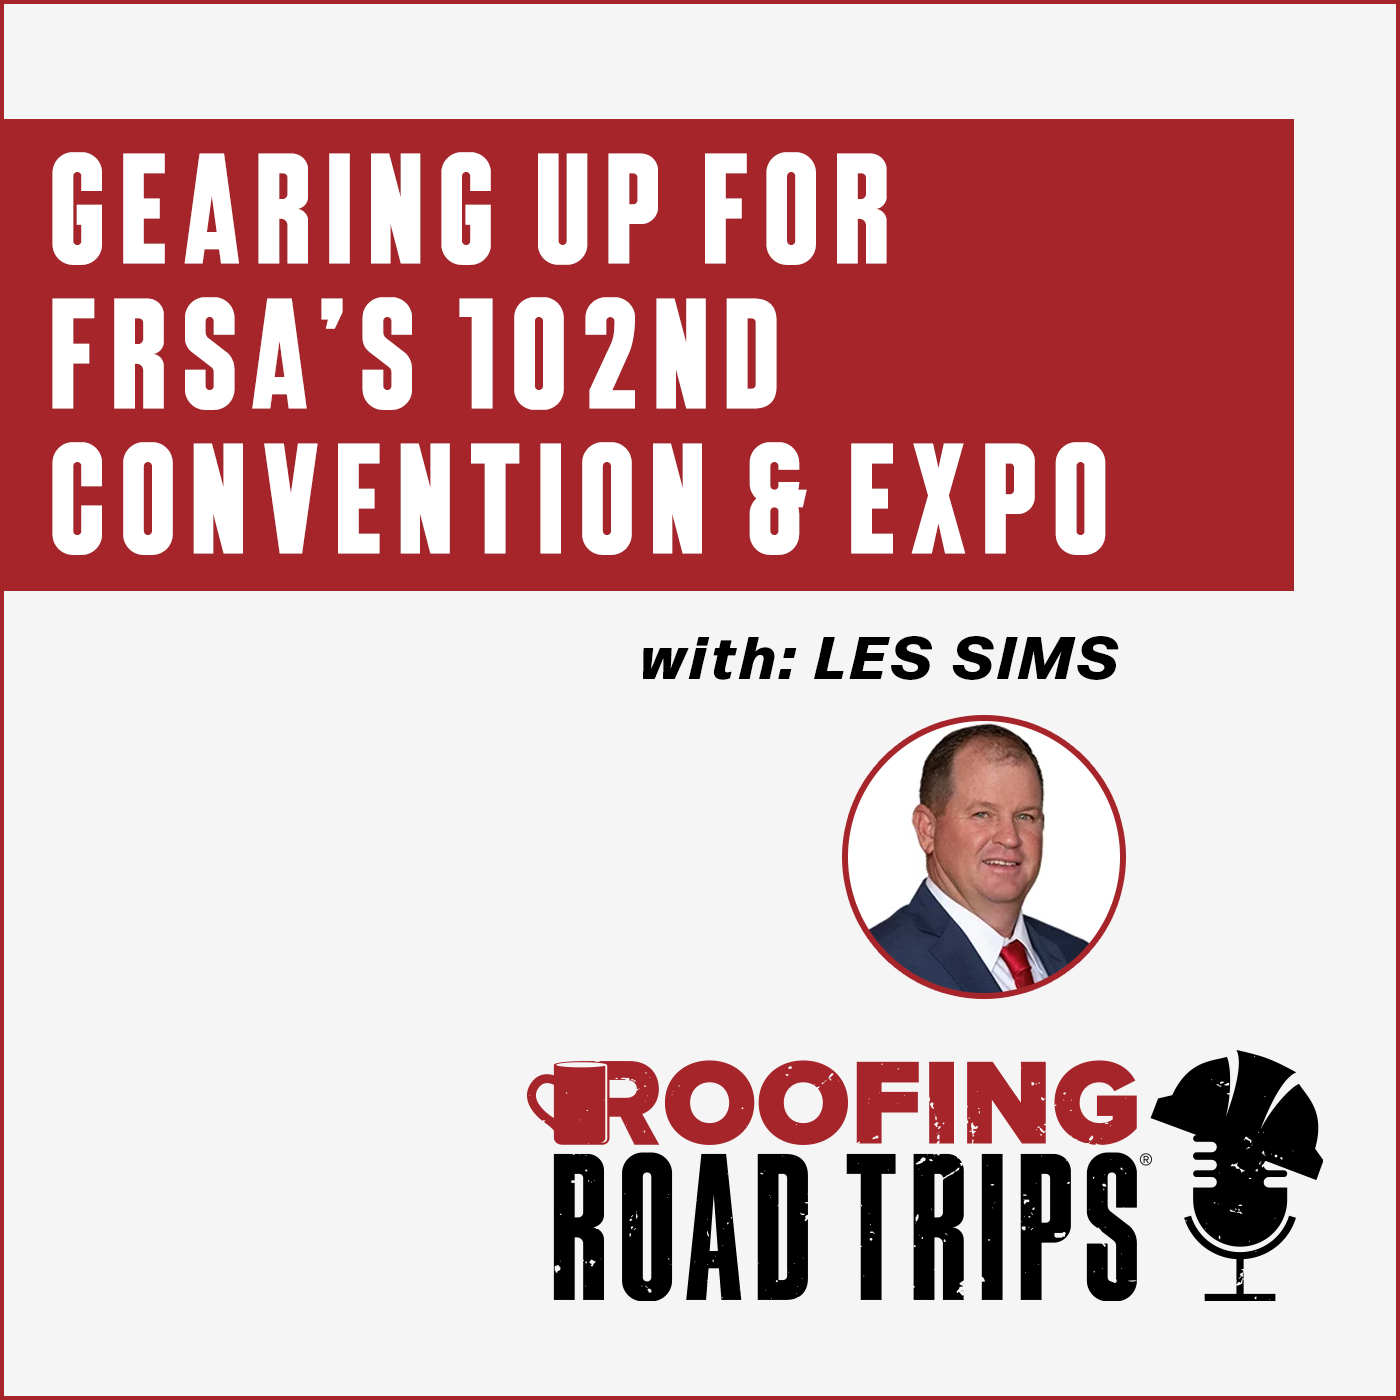 Les Sims - Gearing up for FRSA